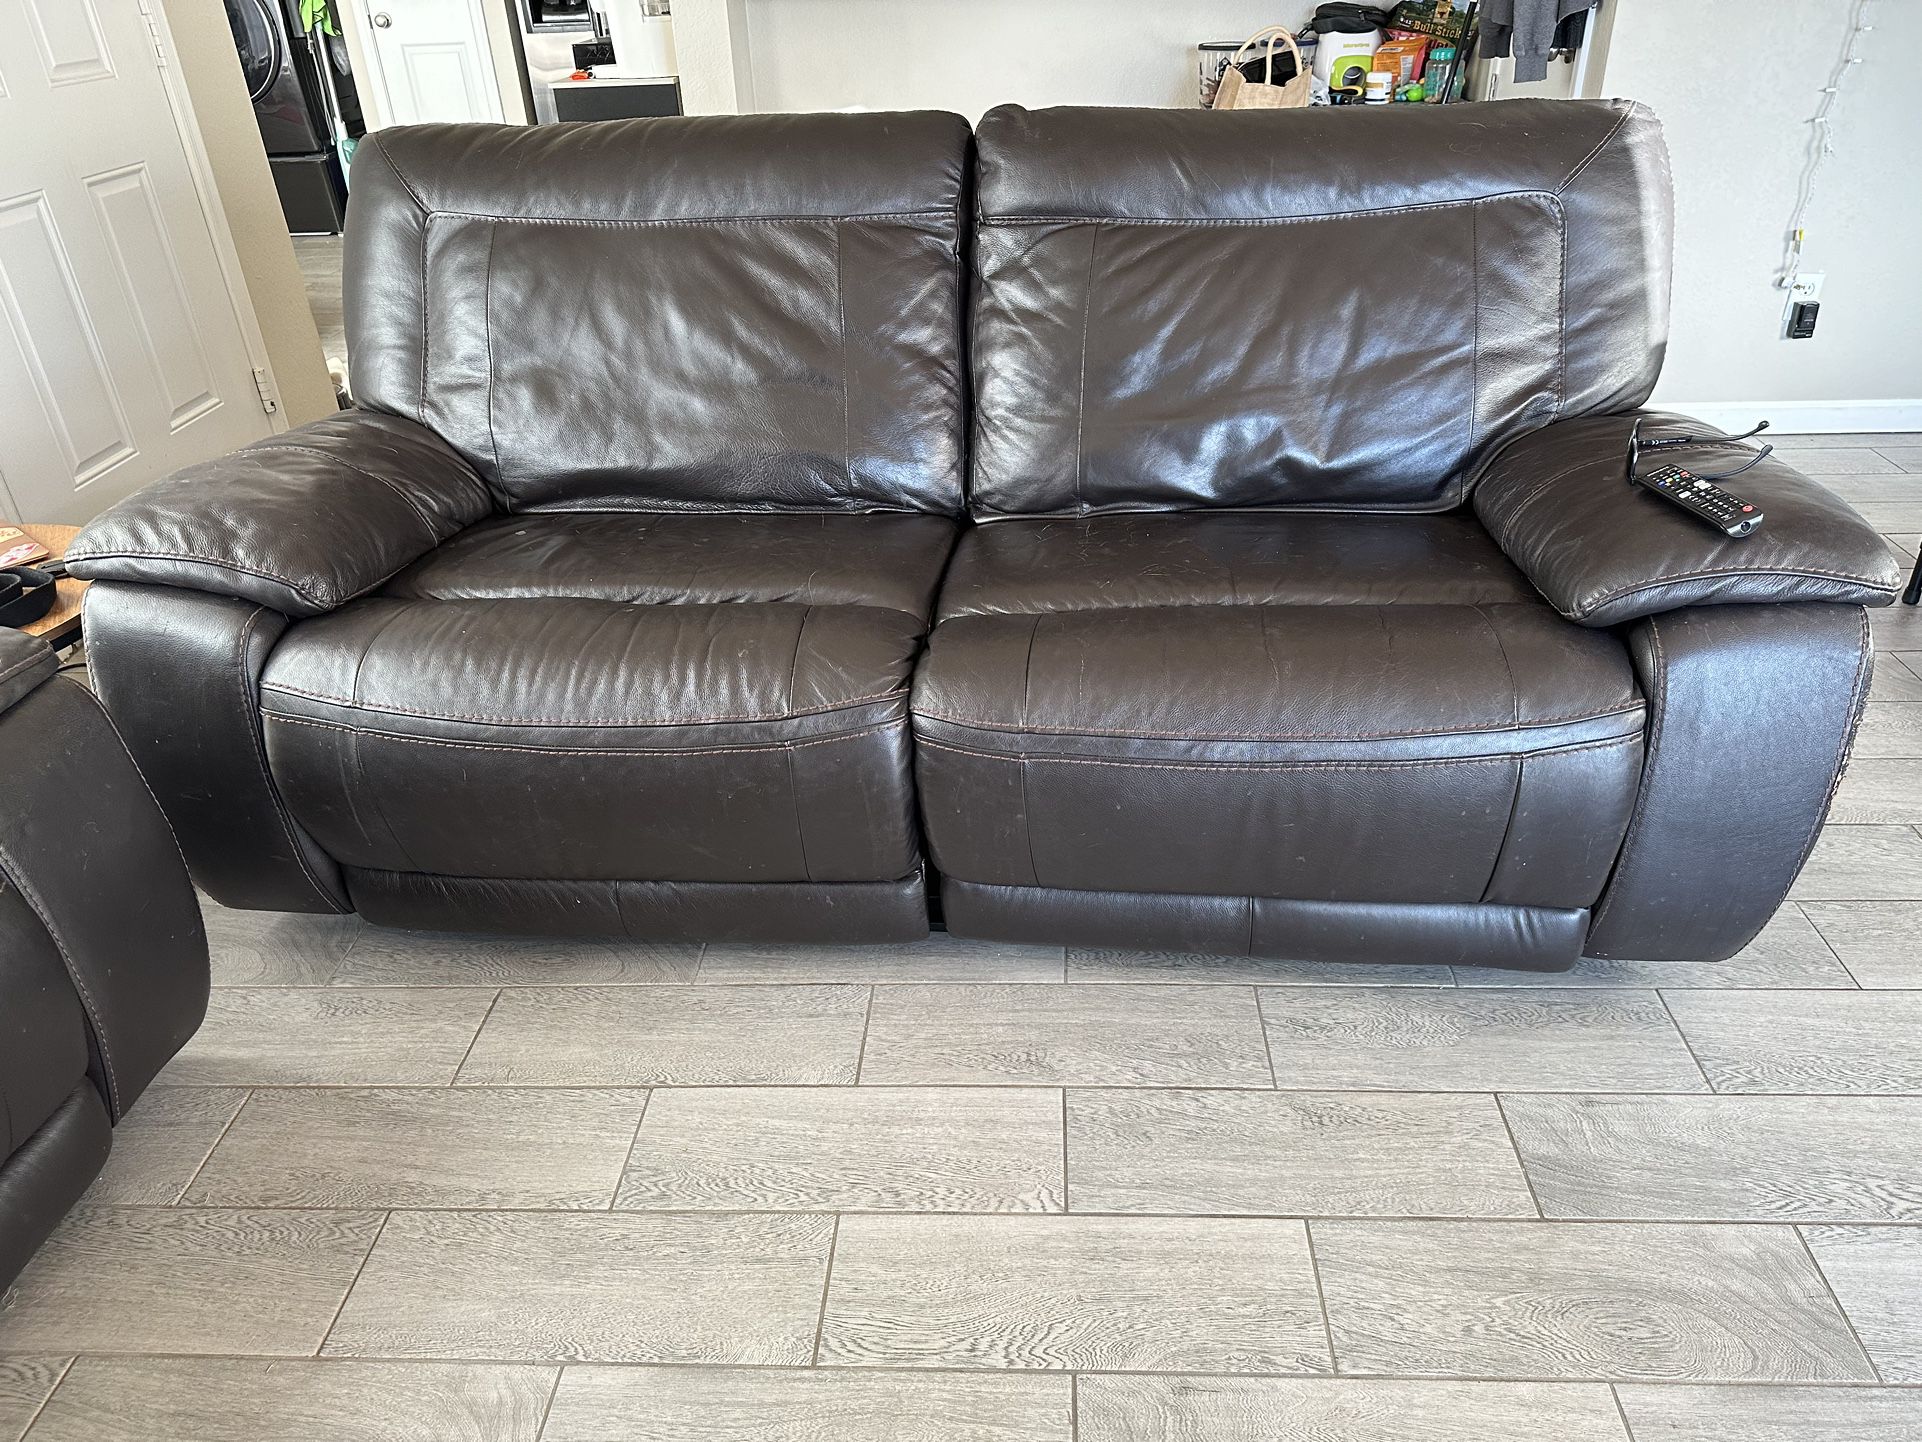 Black leather couches 